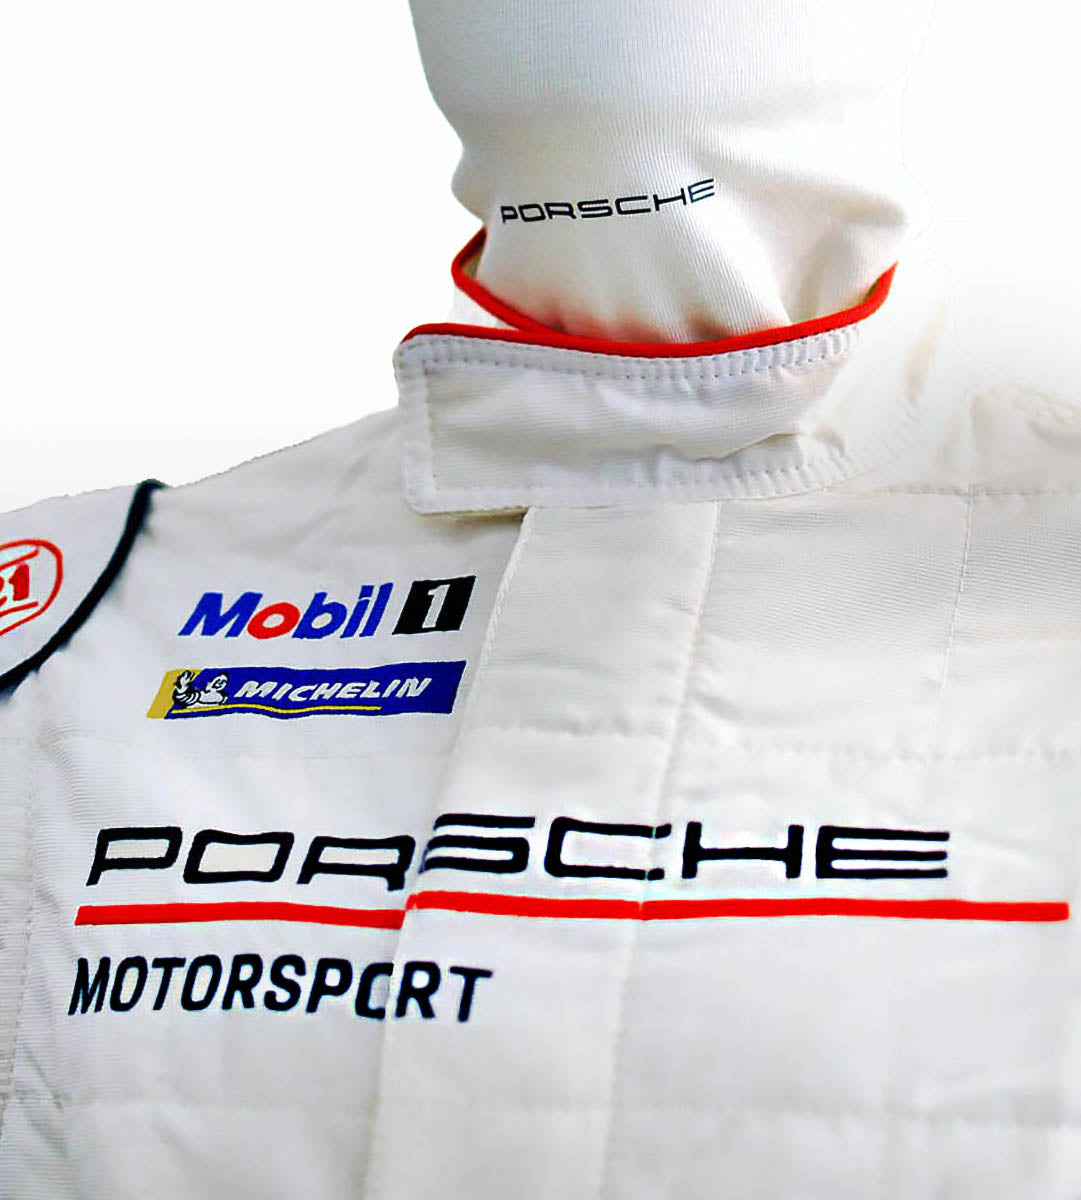 Stand 21 Porsche Motorsport Race Suit ST3000 image the best deal with the lowest price and discount closeup image